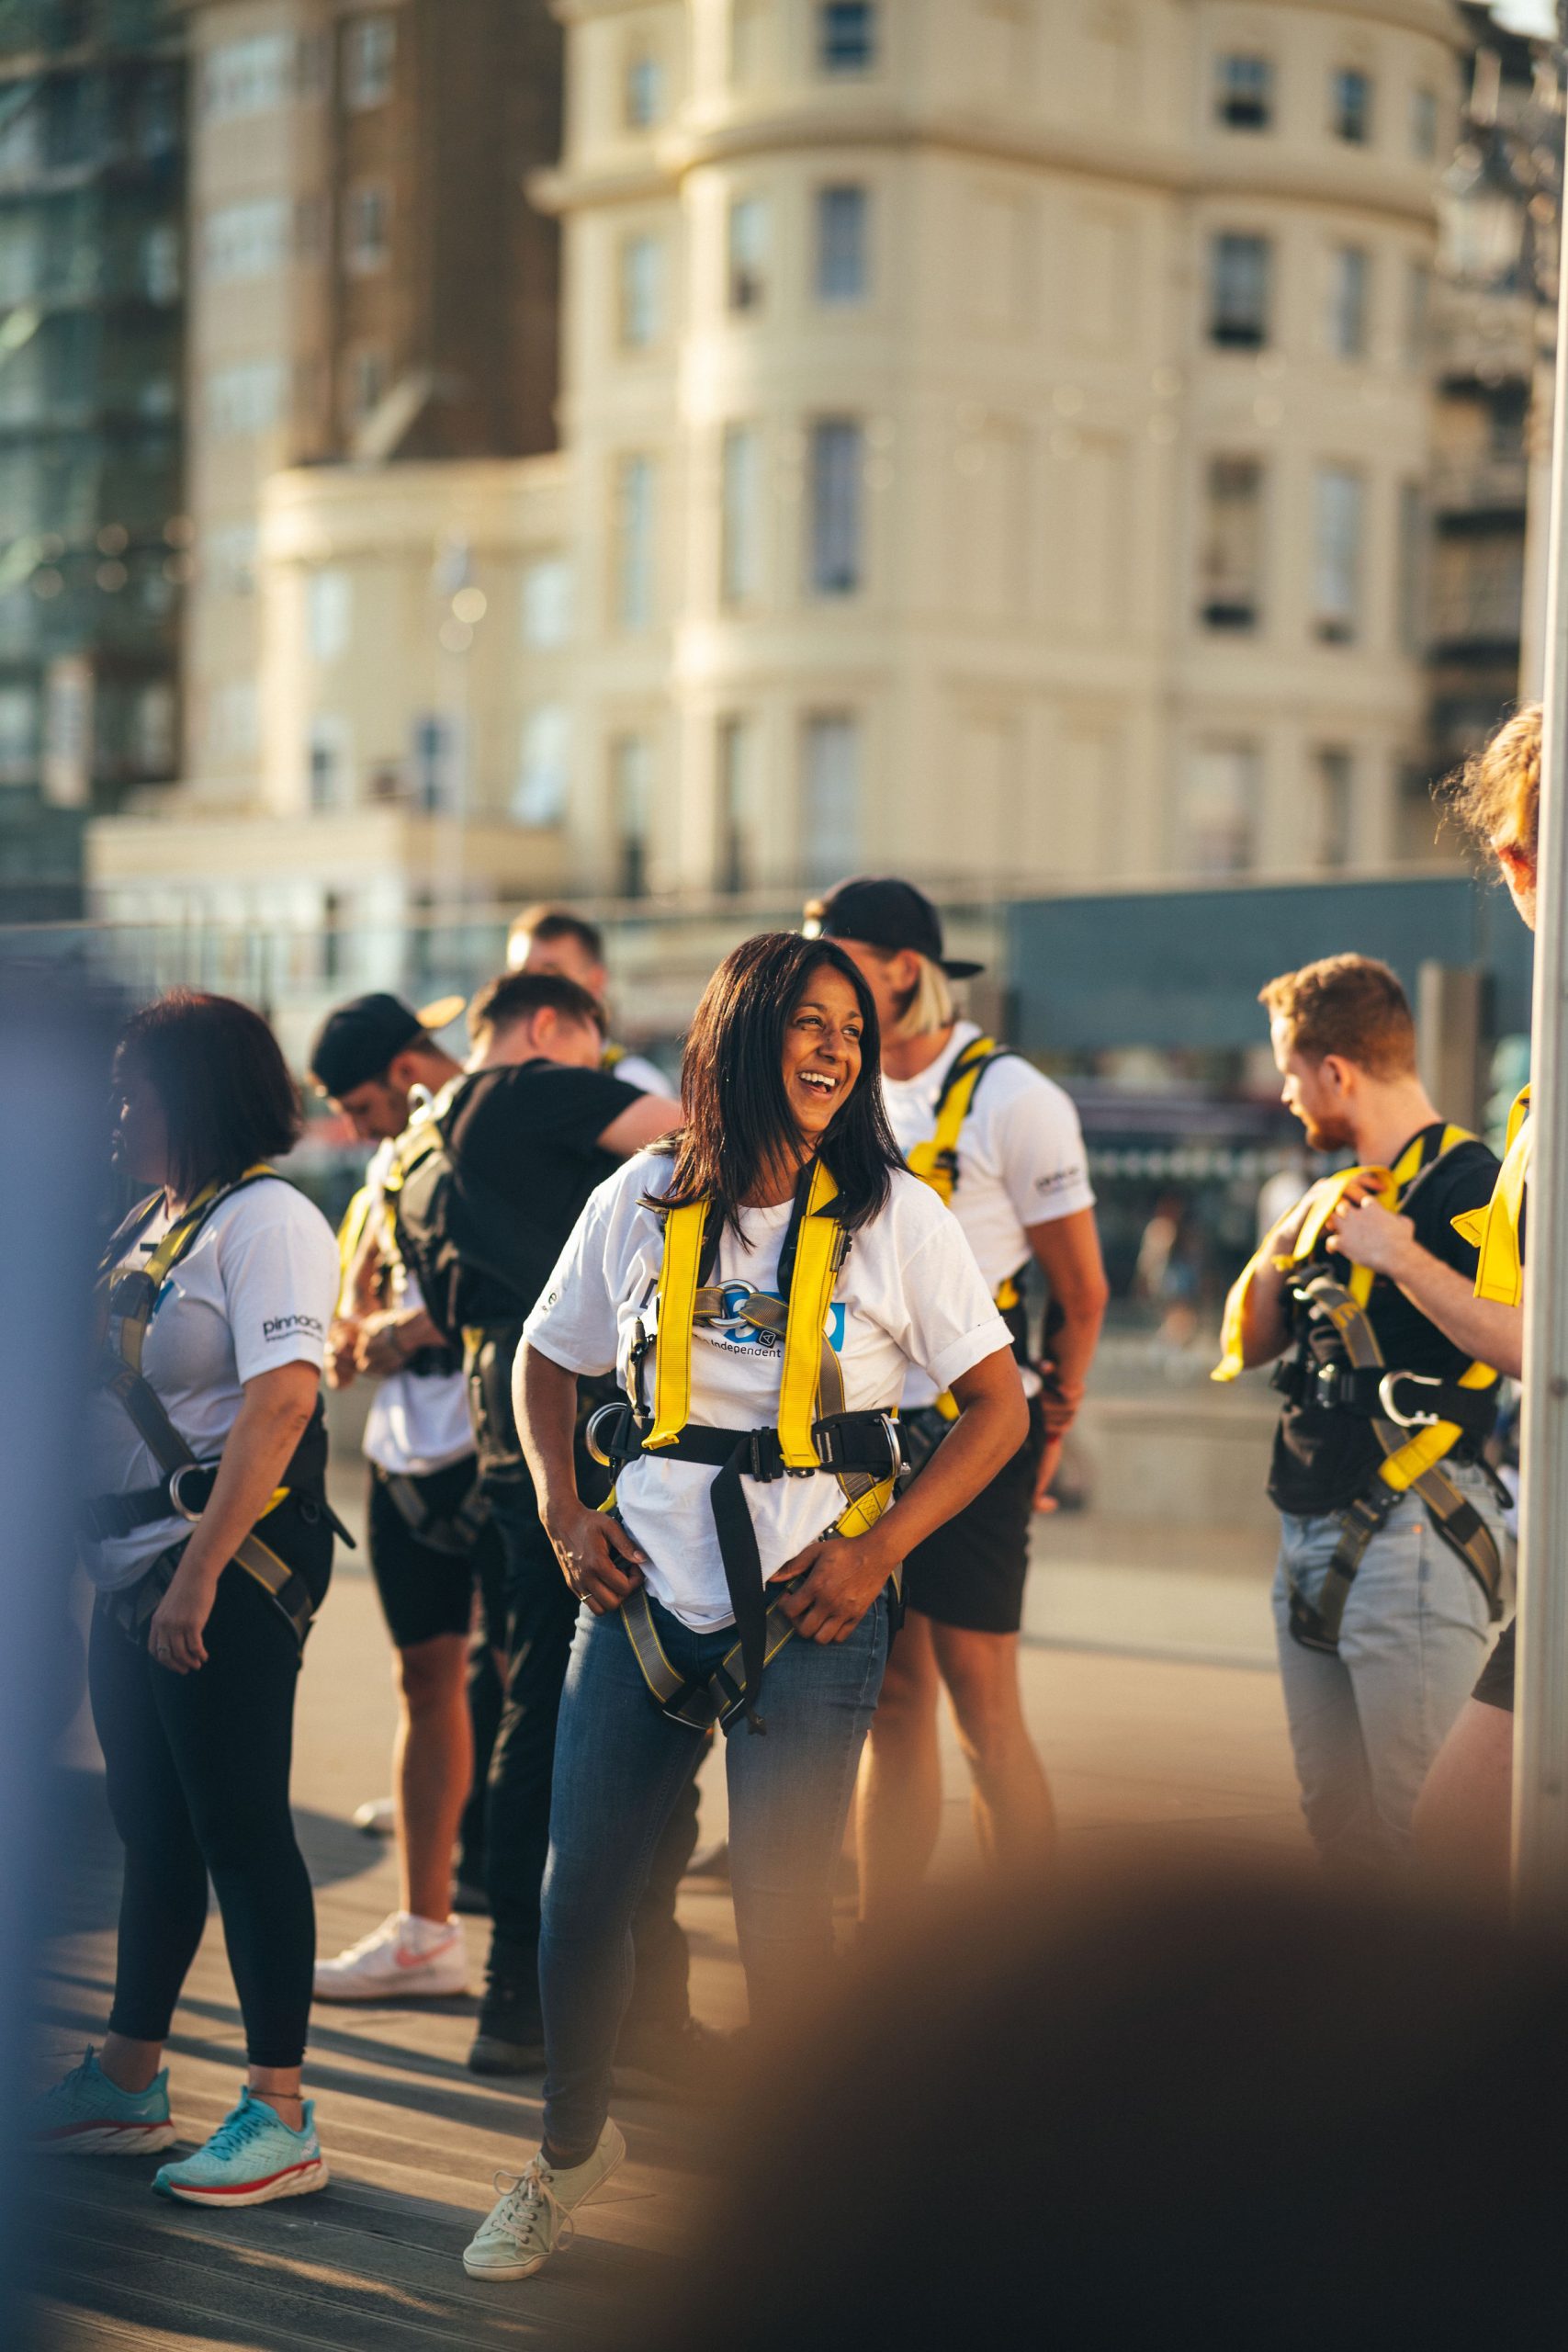 A smiling woman in a harness stands among a group of people preparing for an adventurous activity.